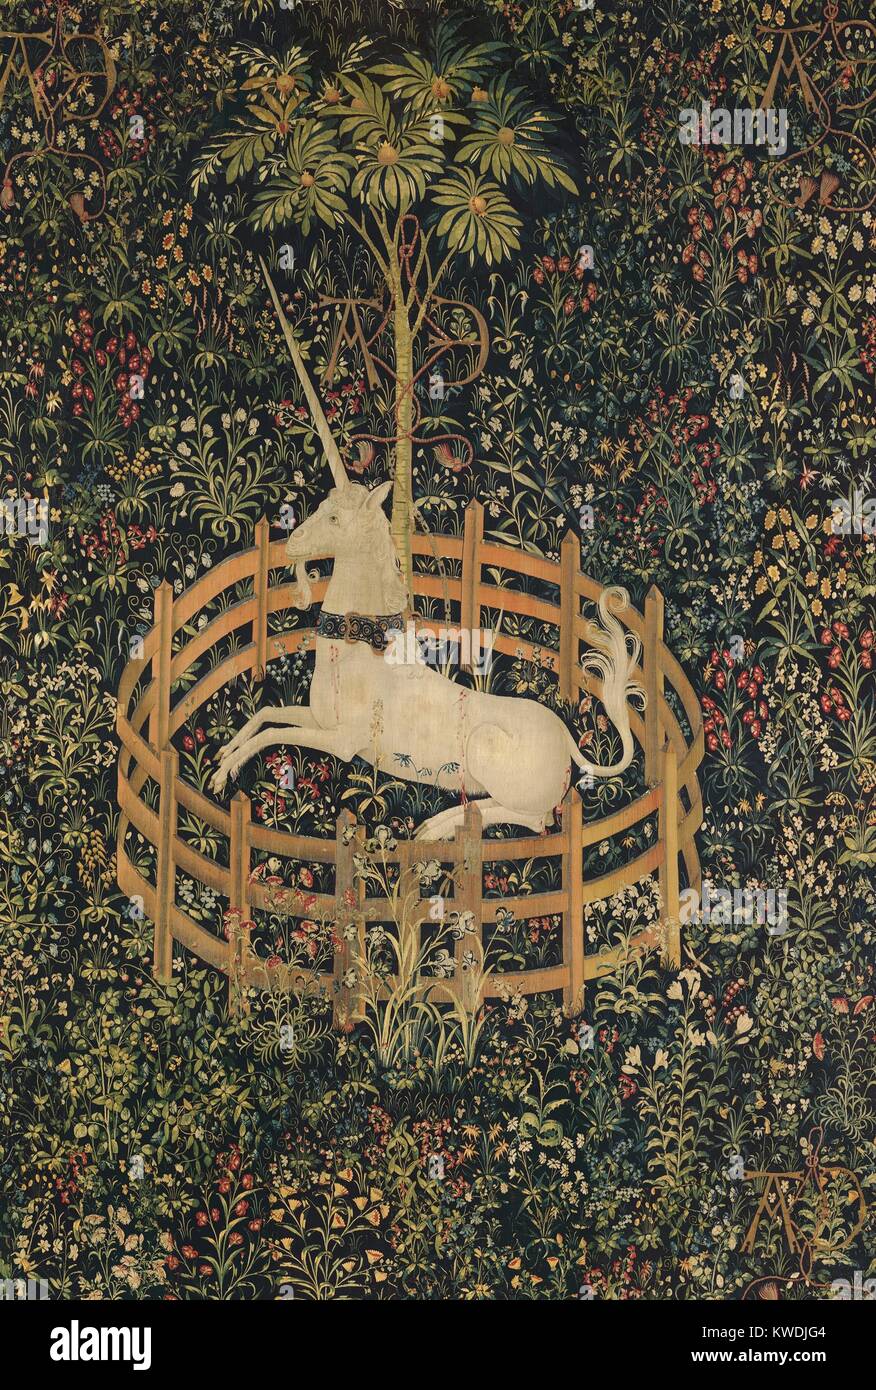 THE UNICORN IN CAPTIVITY, 1495–1505, Netherlandish, Northern Renaissance tapestry. Fertility appears to be the theme of this tapestry. The unicorn rests under a pomegranate tree—a medieval symbol of fertility and marriage. Many of the other plants echo this theme of marriage and procreation (BSLOC 2017 16 118) Stock Photo